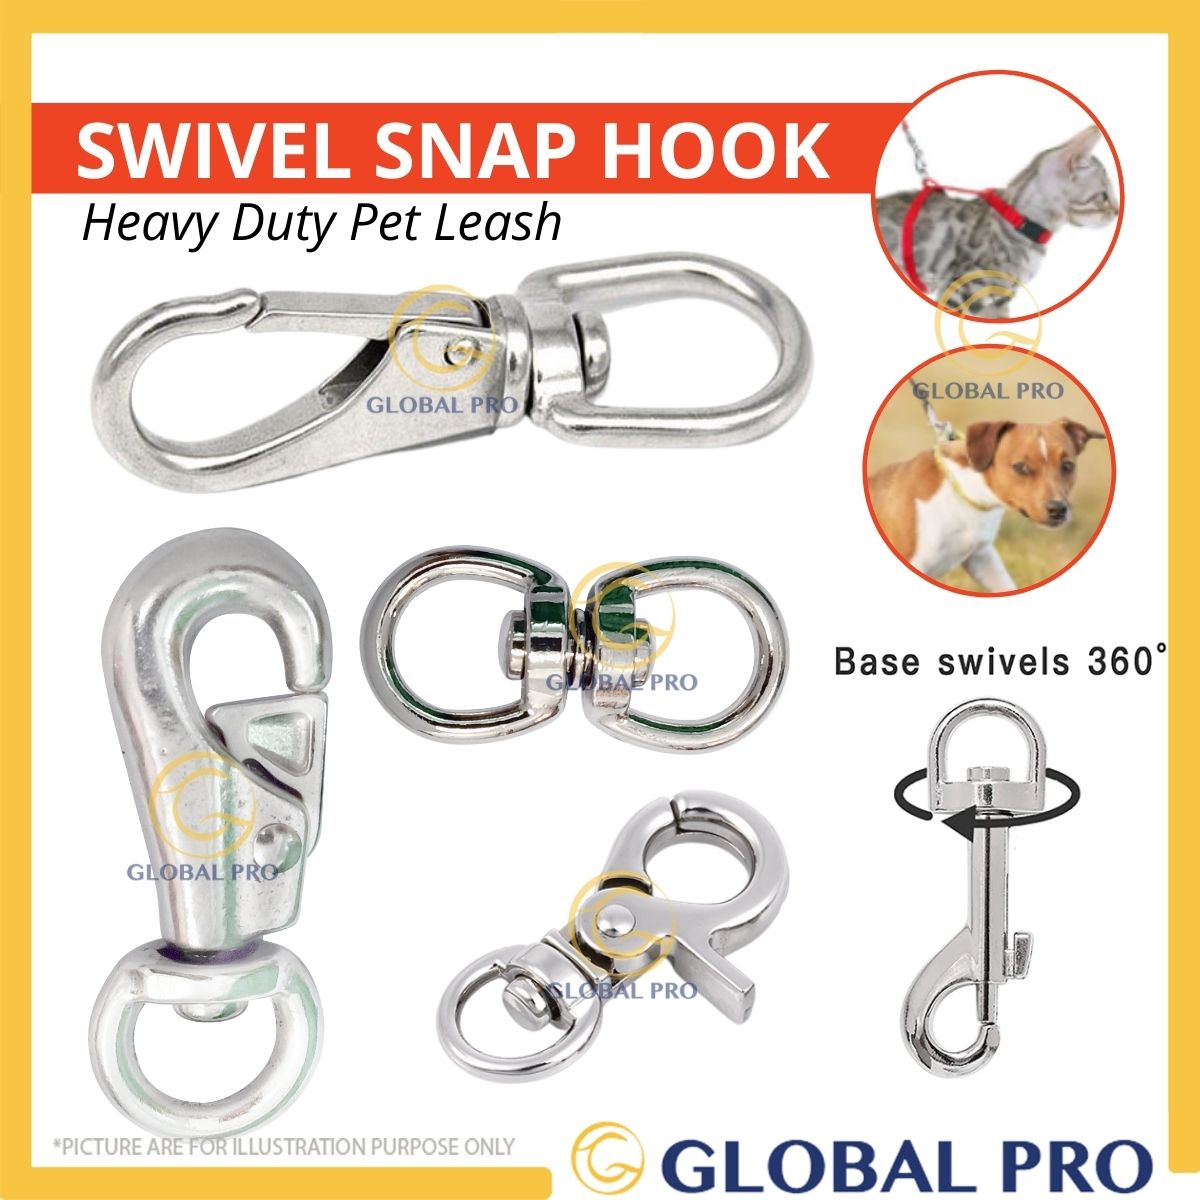 Buy Swivel Metal Snap Hooks Fit for Connecting to Dog Leash